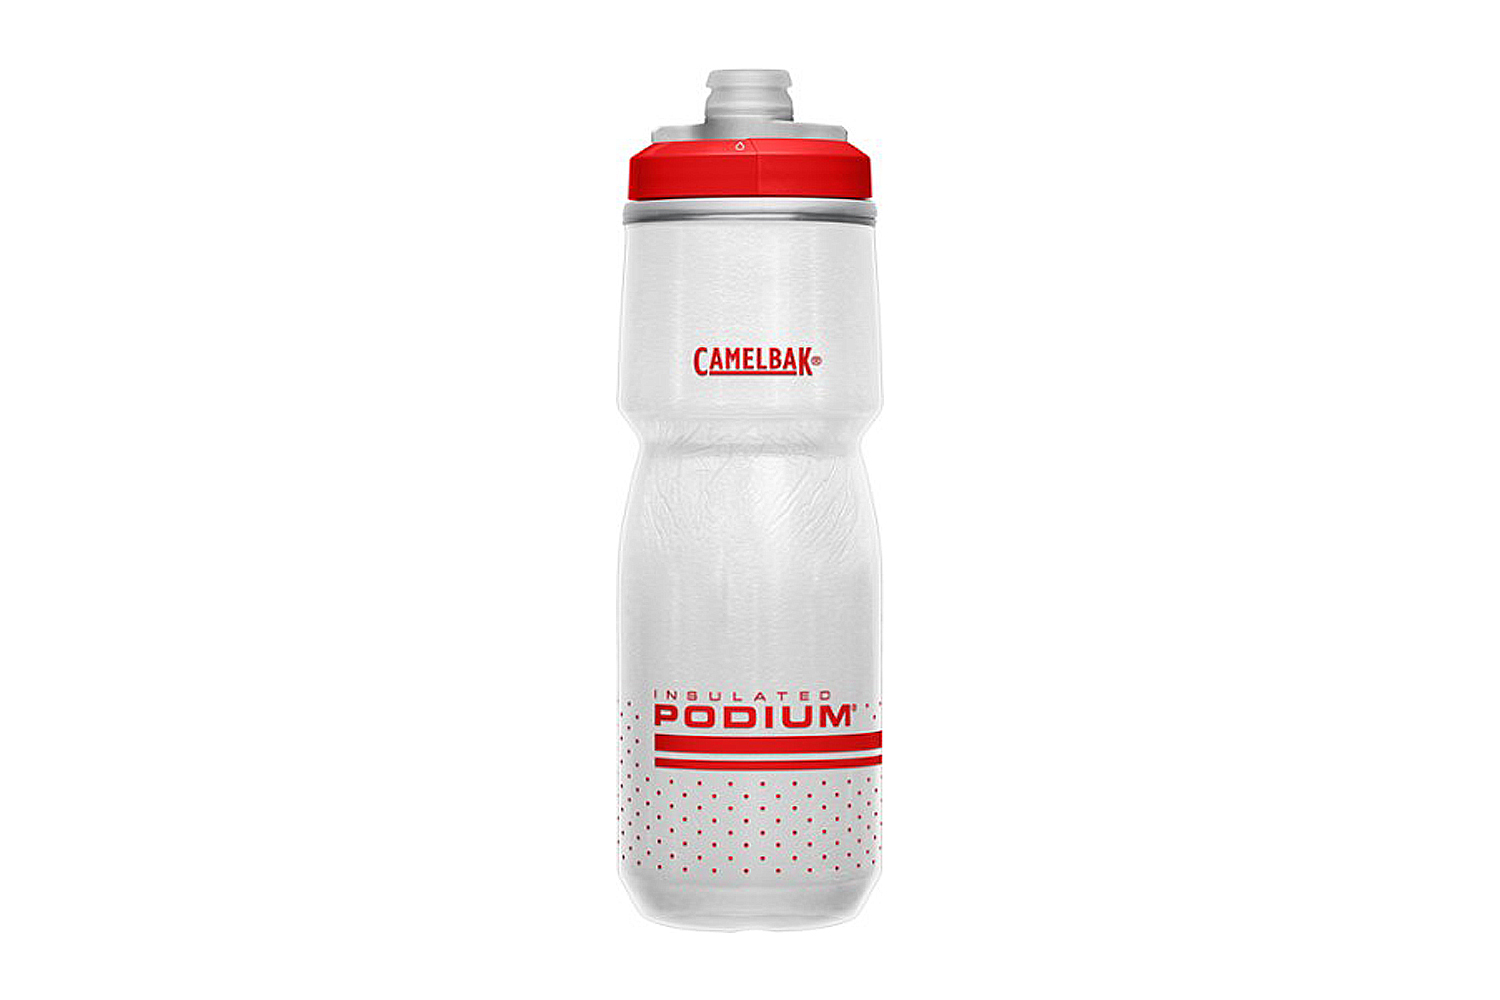 https://www.themanual.com/wp-content/uploads/sites/9/2021/07/camelbak-podium-big-chill-insulated-water-bottle.jpg?fit=800%2C800&p=1